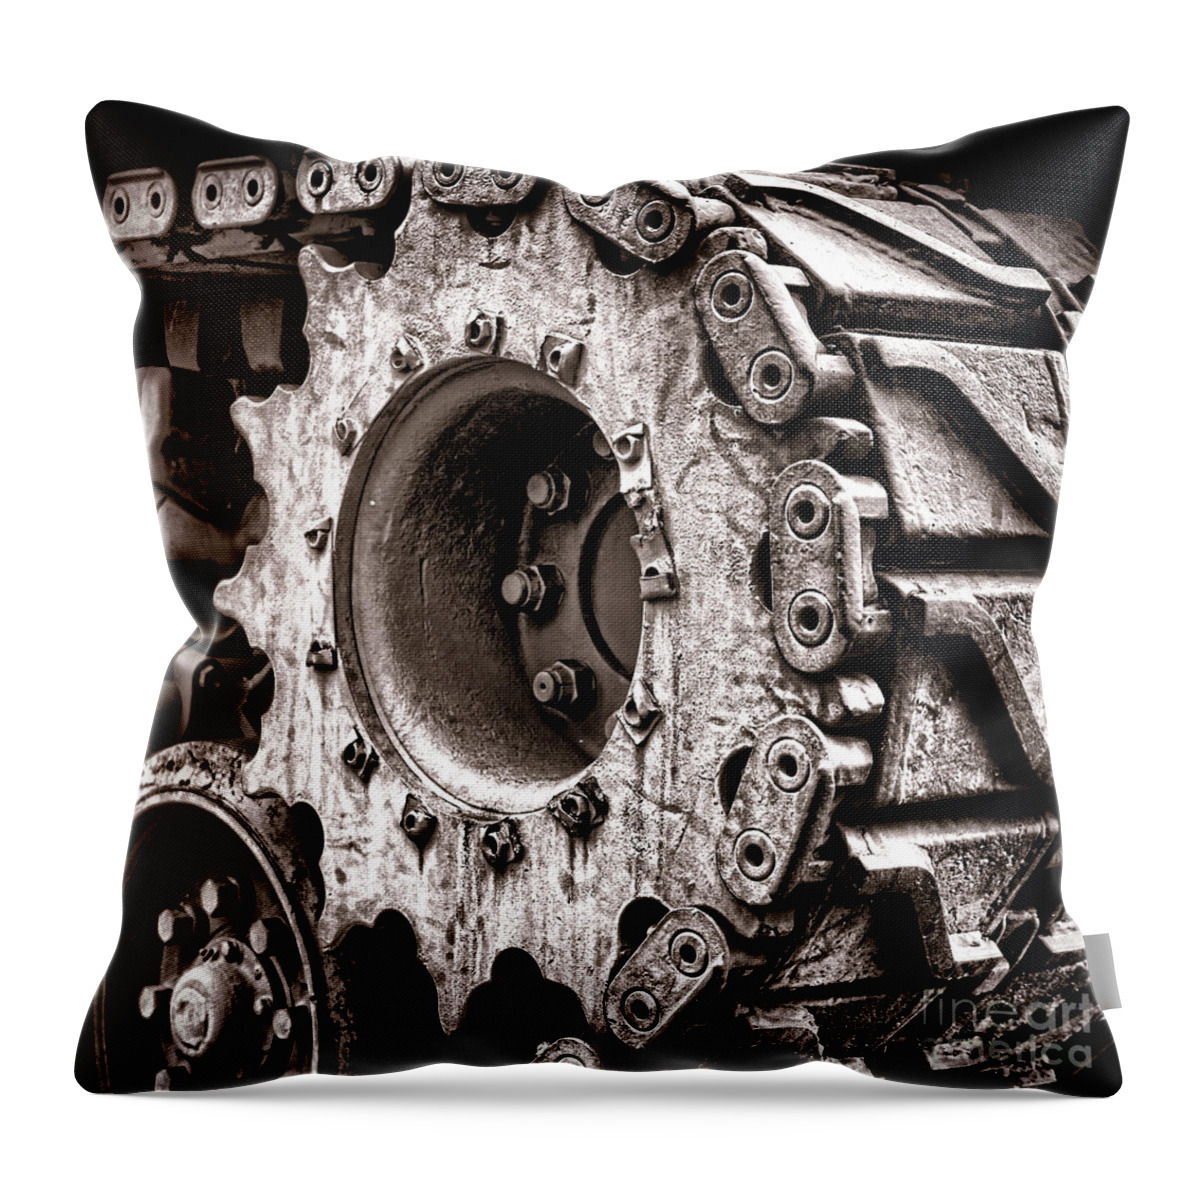 Sherman Throw Pillow featuring the photograph Sherman Tank Drive Sprocket by Olivier Le Queinec